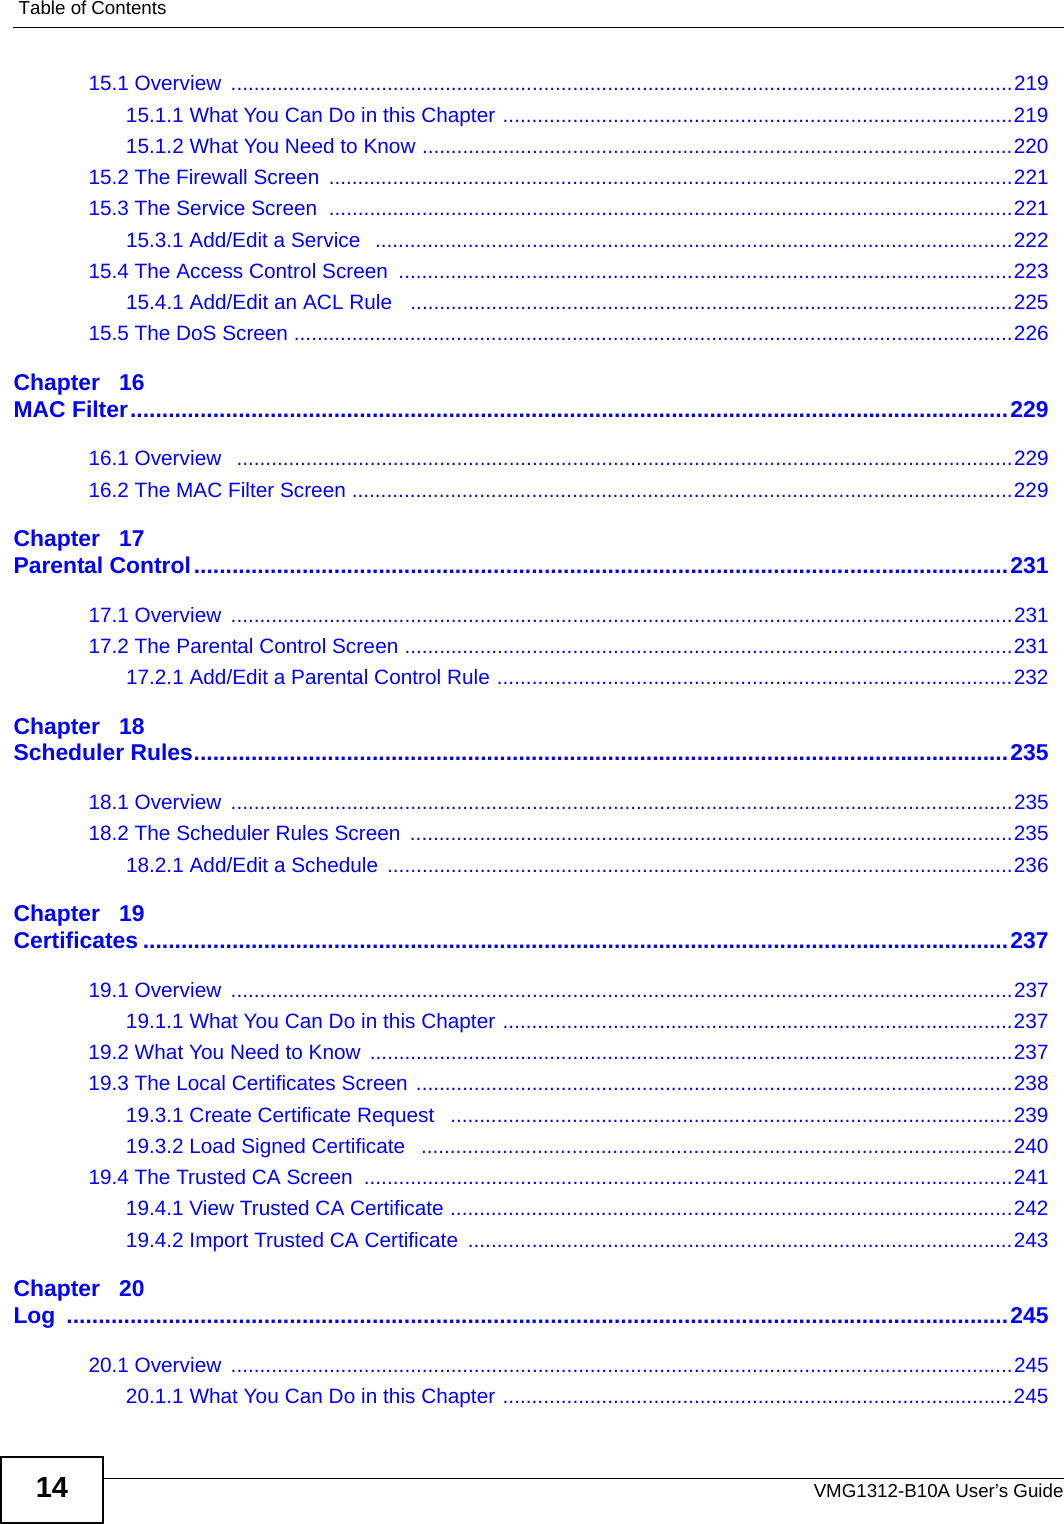 Table of ContentsVMG1312-B10A User’s Guide1415.1 Overview  .......................................................................................................................................21915.1.1 What You Can Do in this Chapter ........................................................................................21915.1.2 What You Need to Know ......................................................................................................22015.2 The Firewall Screen  ......................................................................................................................22115.3 The Service Screen  ......................................................................................................................22115.3.1 Add/Edit a Service   ..............................................................................................................22215.4 The Access Control Screen  ..........................................................................................................22315.4.1 Add/Edit an ACL Rule   ........................................................................................................22515.5 The DoS Screen ............................................................................................................................226Chapter   16MAC Filter..........................................................................................................................................22916.1 Overview   ......................................................................................................................................22916.2 The MAC Filter Screen ..................................................................................................................229Chapter   17Parental Control................................................................................................................................23117.1 Overview  .......................................................................................................................................23117.2 The Parental Control Screen .........................................................................................................23117.2.1 Add/Edit a Parental Control Rule .........................................................................................232Chapter   18Scheduler Rules................................................................................................................................23518.1 Overview  .......................................................................................................................................23518.2 The Scheduler Rules Screen  ........................................................................................................23518.2.1 Add/Edit a Schedule  ............................................................................................................236Chapter   19Certificates ........................................................................................................................................23719.1 Overview  .......................................................................................................................................23719.1.1 What You Can Do in this Chapter ........................................................................................23719.2 What You Need to Know  ...............................................................................................................23719.3 The Local Certificates Screen .......................................................................................................23819.3.1 Create Certificate Request   .................................................................................................23919.3.2 Load Signed Certificate   ......................................................................................................24019.4 The Trusted CA Screen ................................................................................................................24119.4.1 View Trusted CA Certificate .................................................................................................24219.4.2 Import Trusted CA Certificate  ..............................................................................................243Chapter   20Log ....................................................................................................................................................24520.1 Overview  .......................................................................................................................................24520.1.1 What You Can Do in this Chapter ........................................................................................245